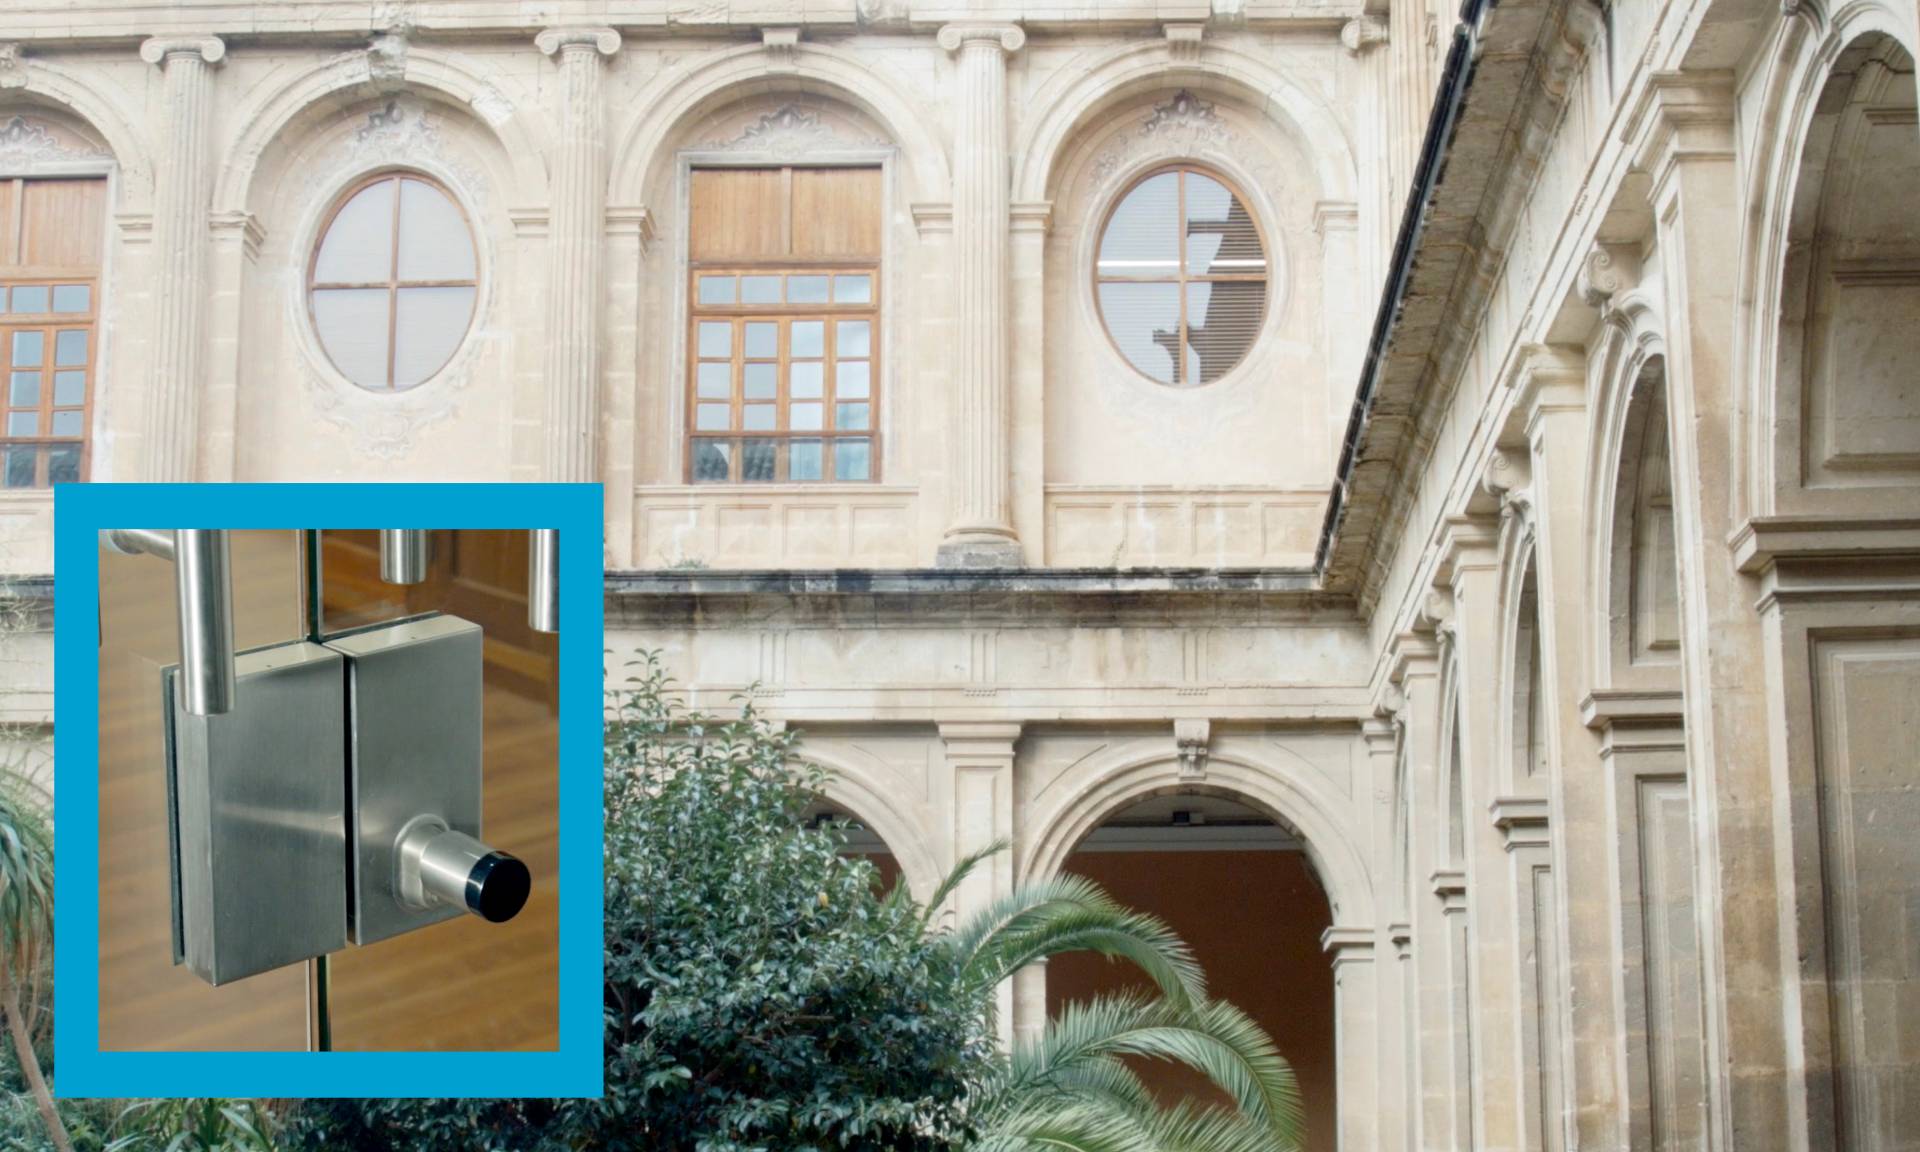 Old buildings are now easy to equip with the latest access control technologies